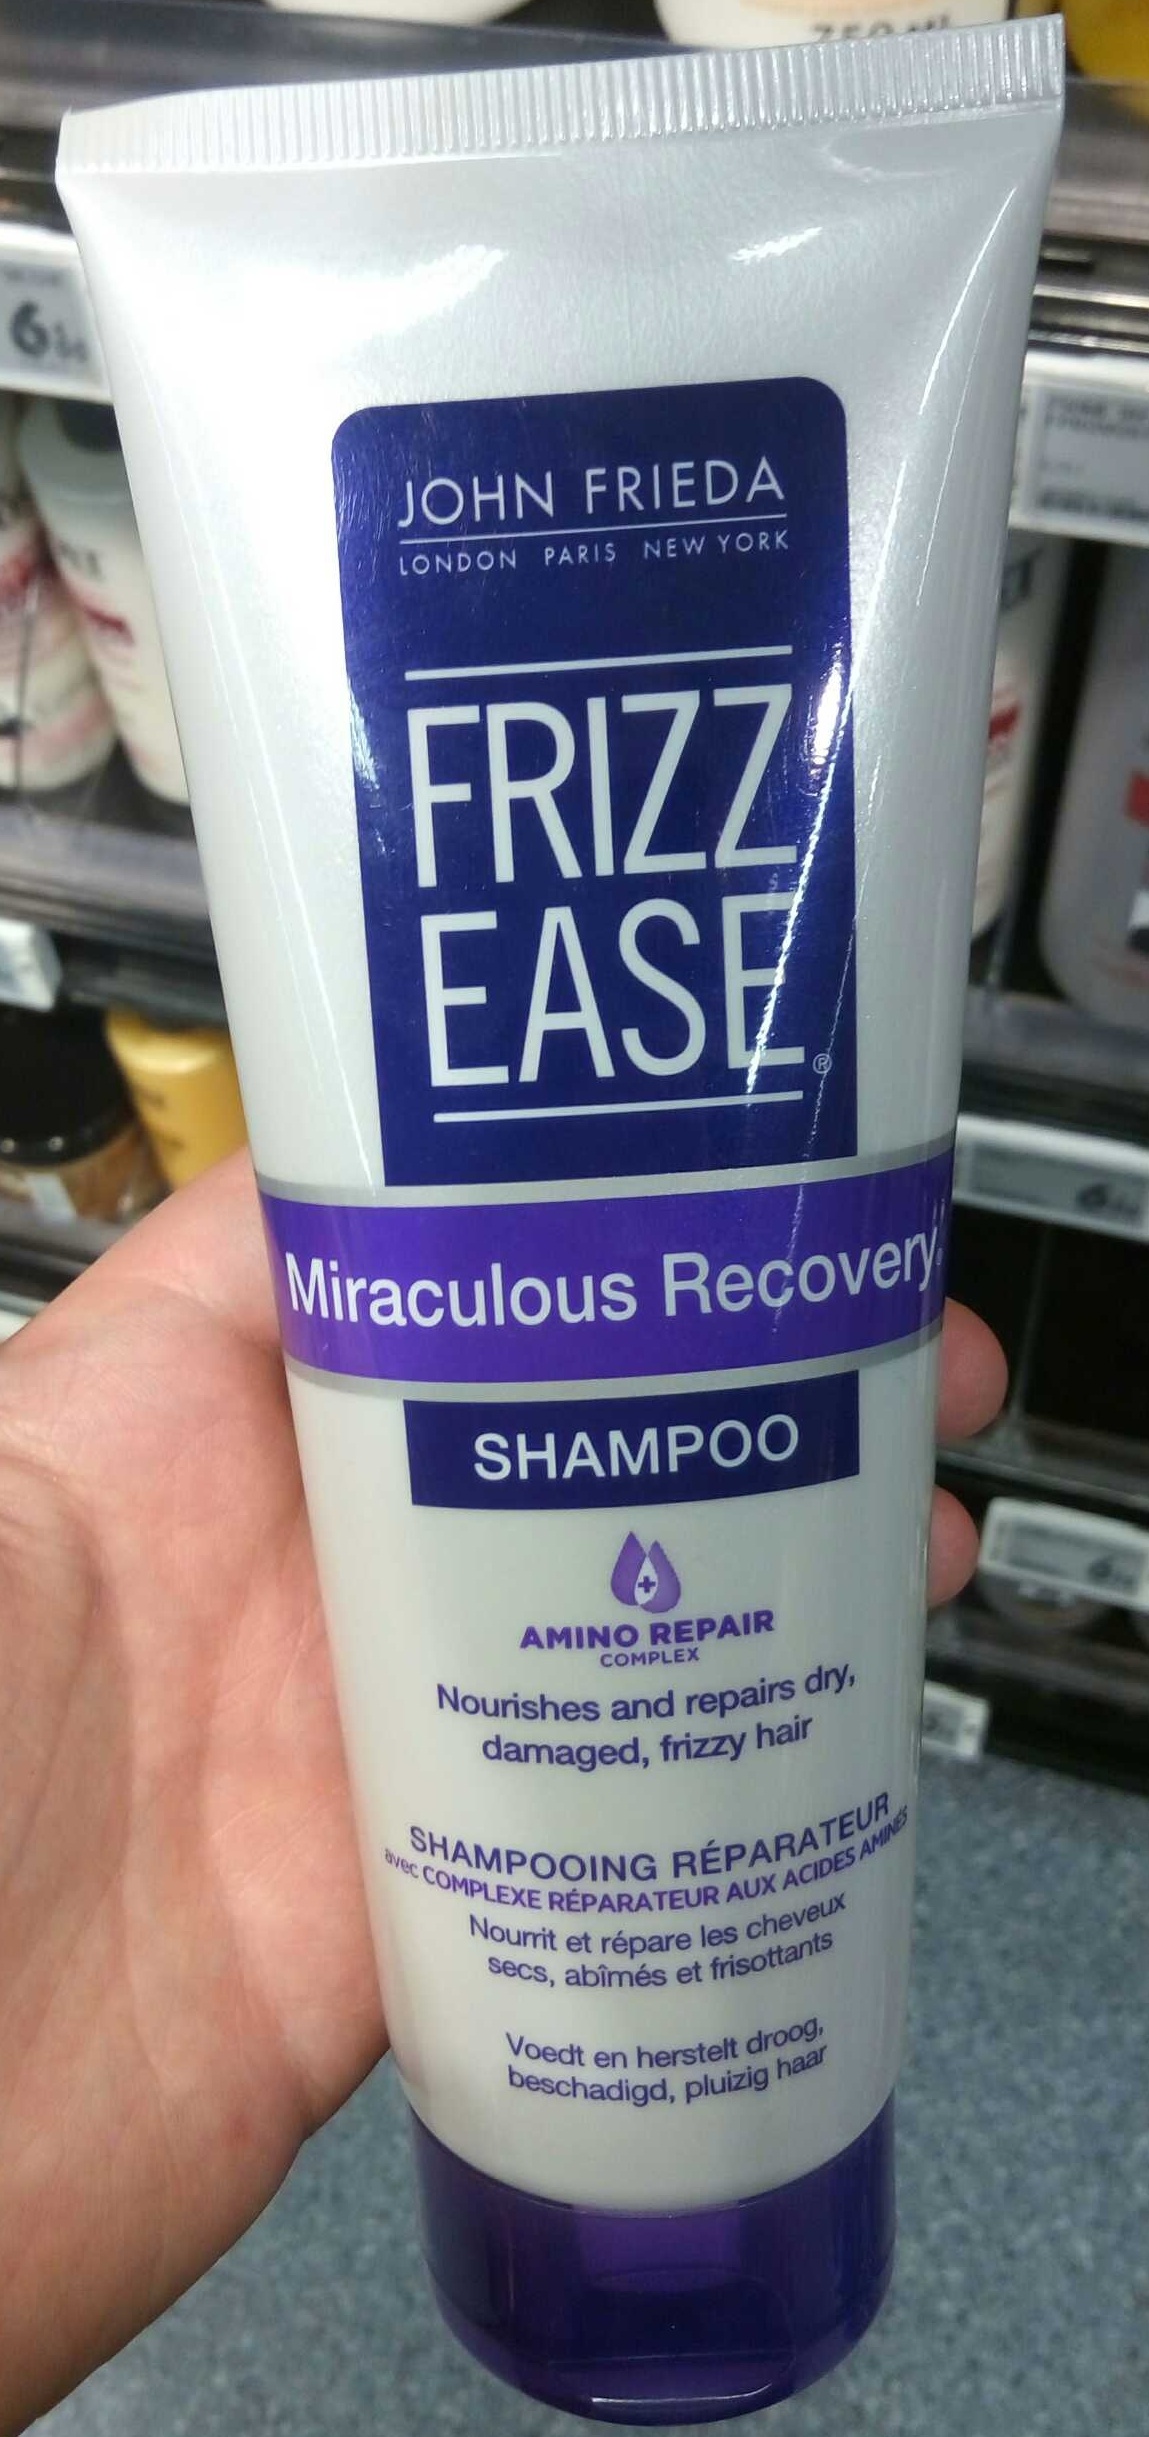 Frizz Ease Miraculous Recovery Shampoo - Product - fr